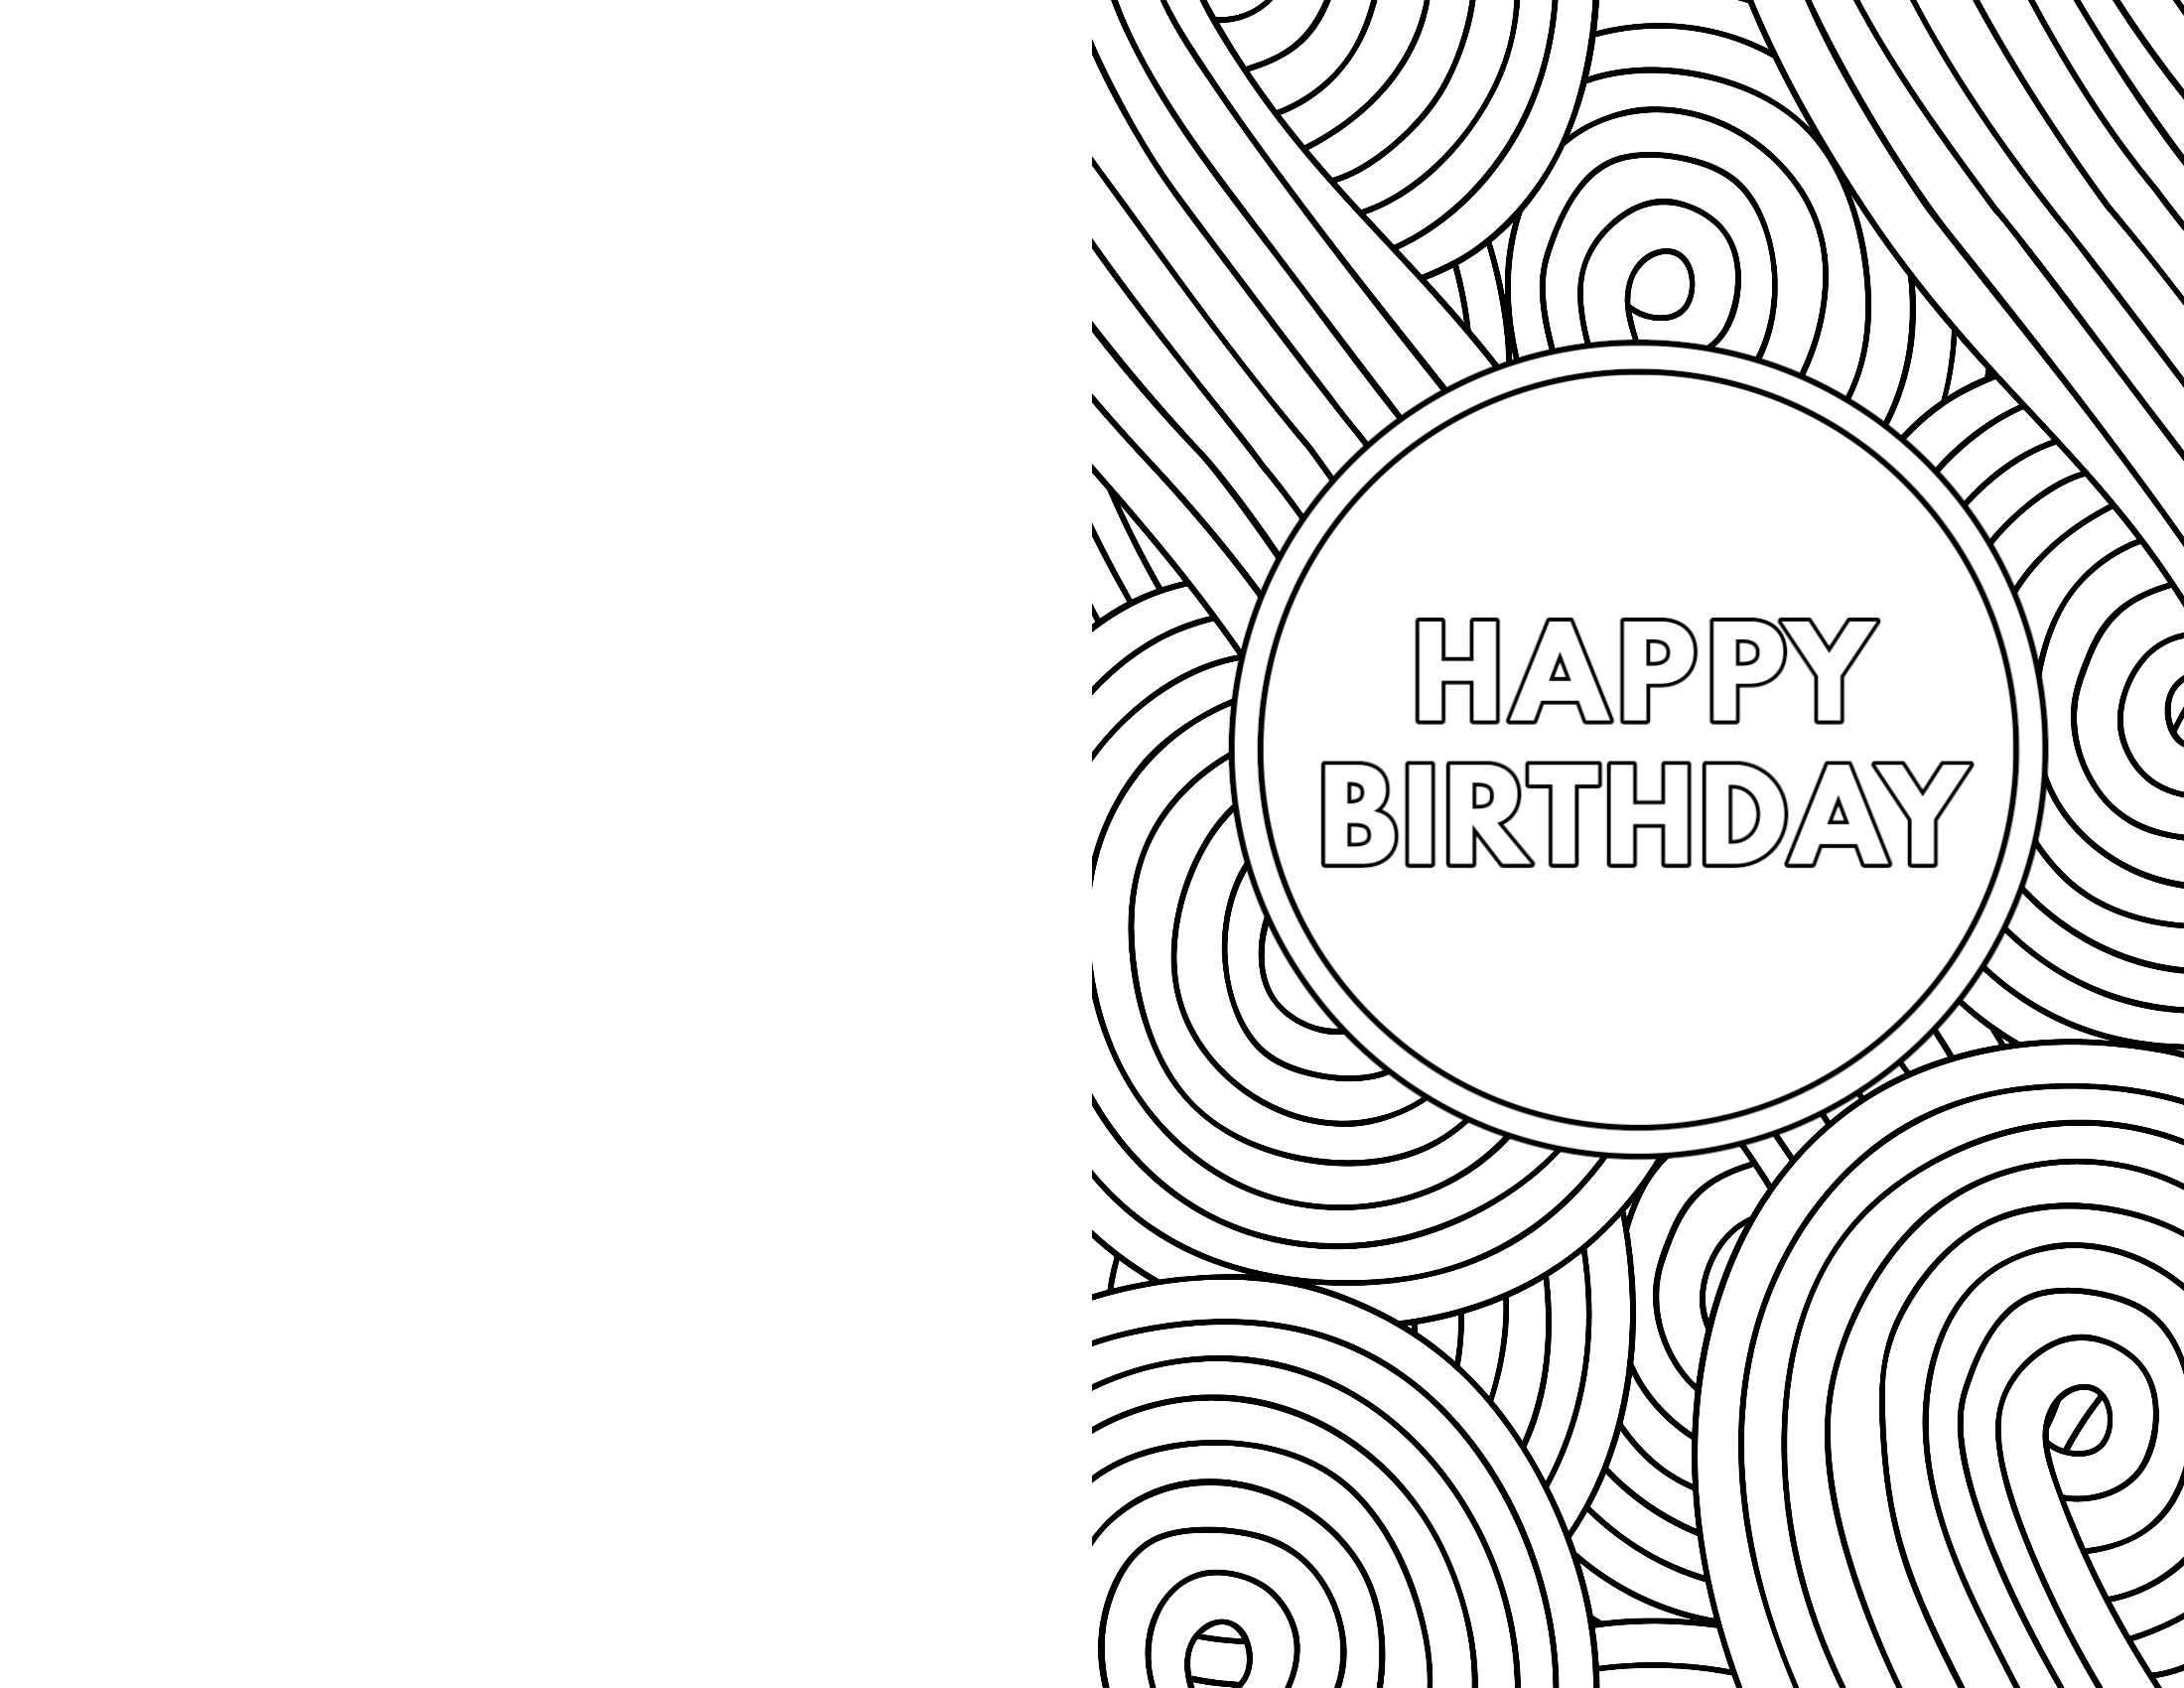 Free Printable Birthday Cards – Paper Trail Design With Foldable Birthday Card Template